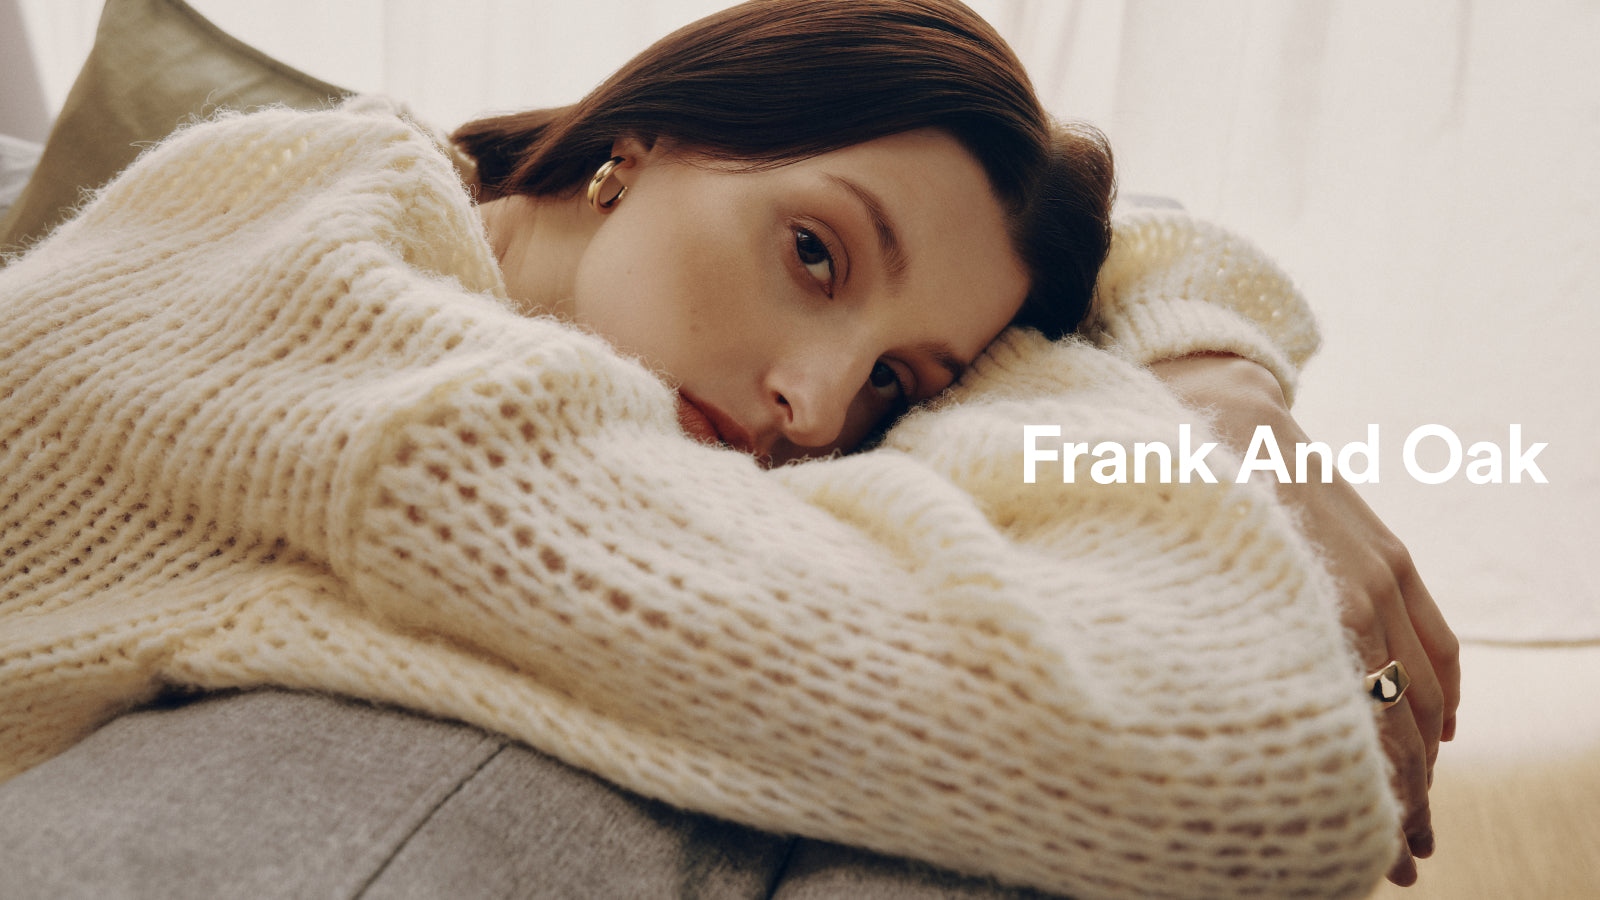 image of woman laying on couch with words Frank And Oak